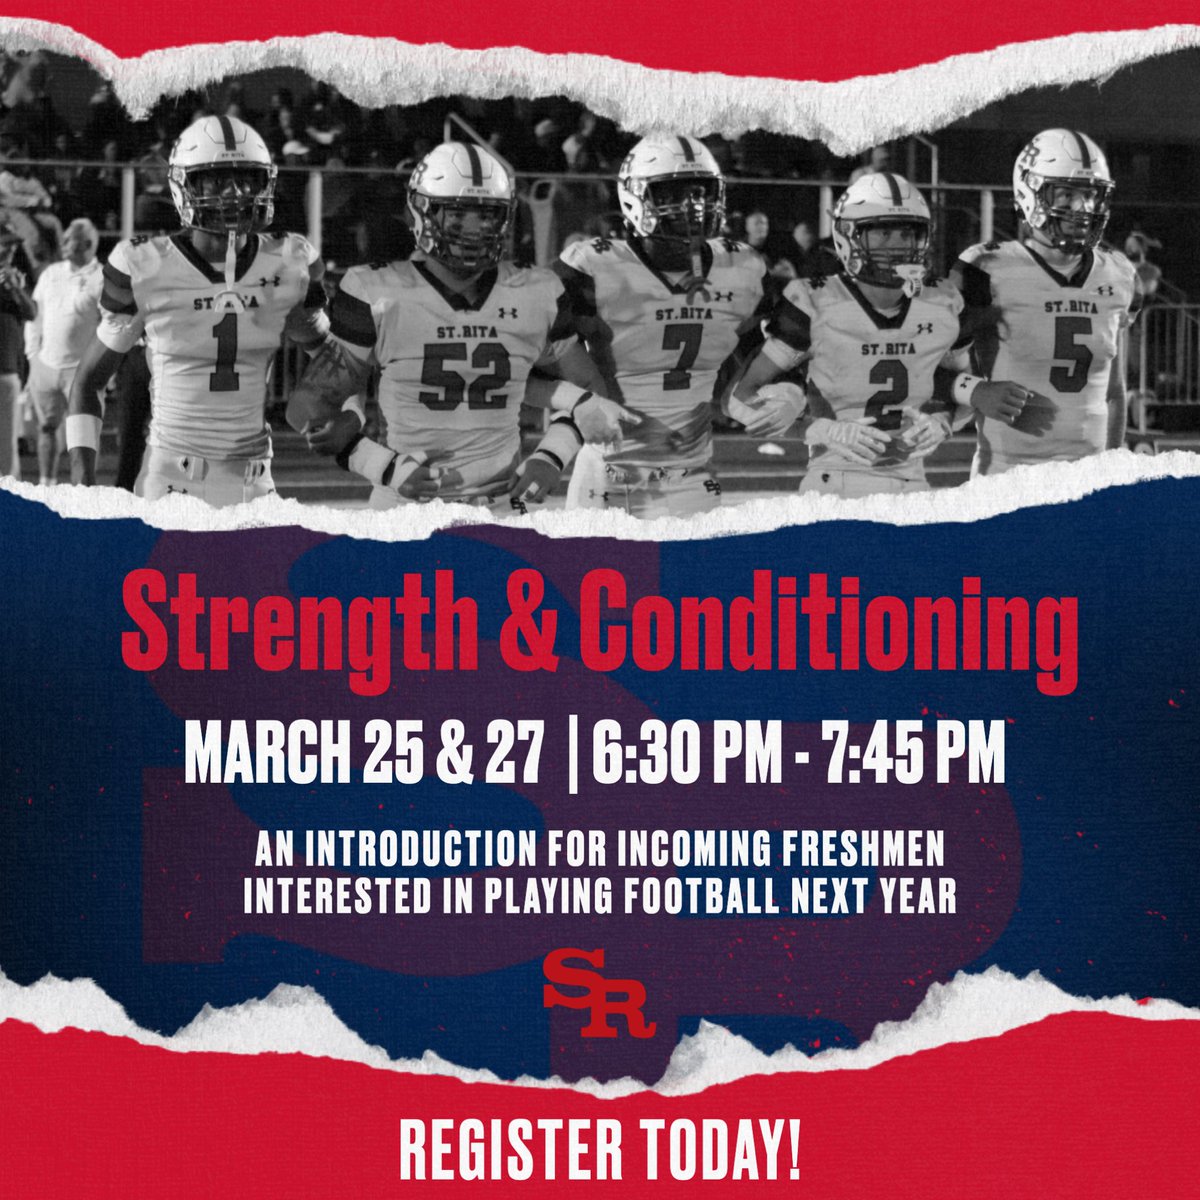 Class of 2028, if you're interested in playing Football next fall, sign up for our Strength and Conditioning Nights on March 25th and 27th from 6:30 PM until 7:45 PM in our Mrozek Family Fitness Center. Click here to register: forms.gle/TRupmaen32LJ6c… #GoMustangs